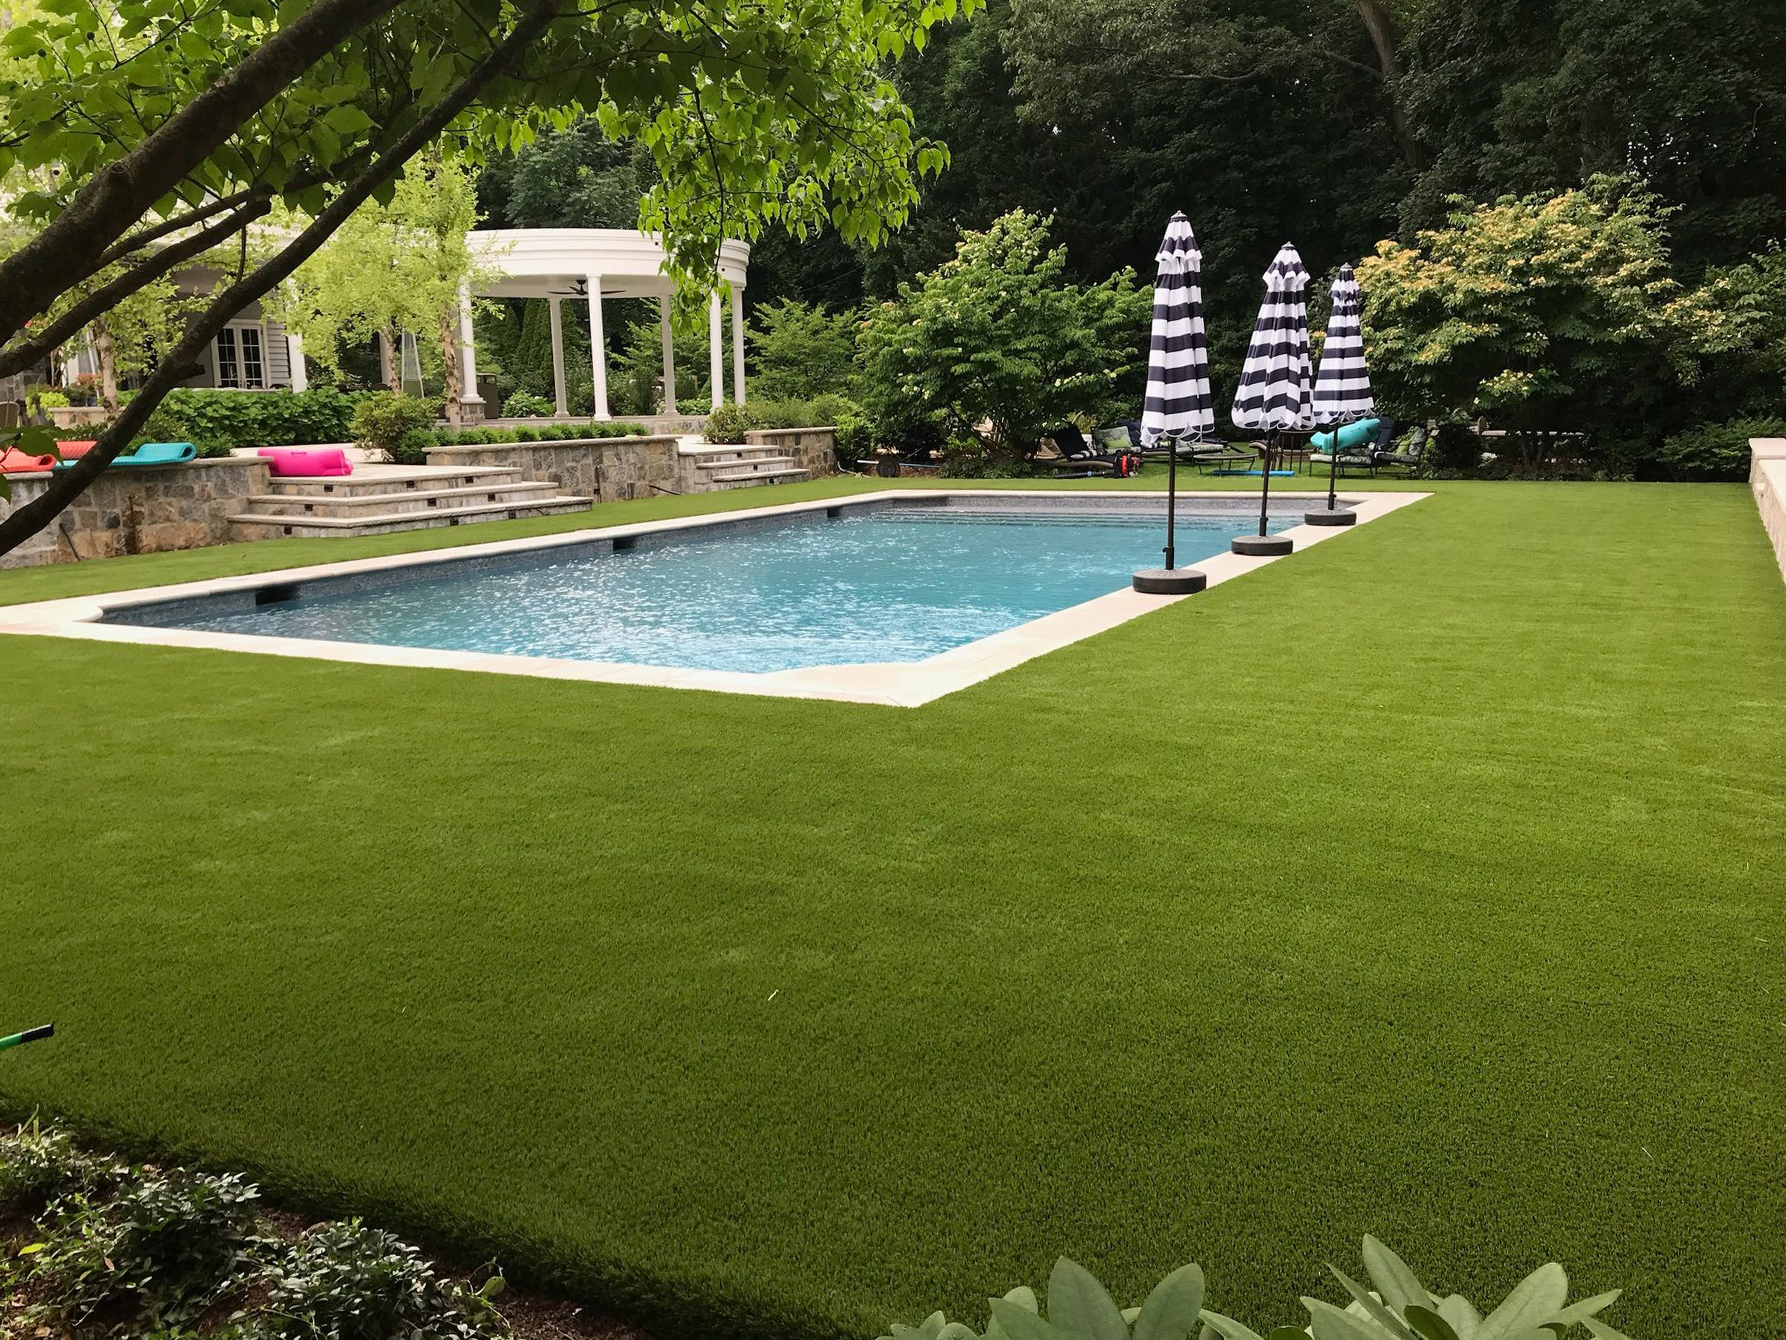 Clear-water swimming pool, area with artificial turf, and a tropical-looking garden.